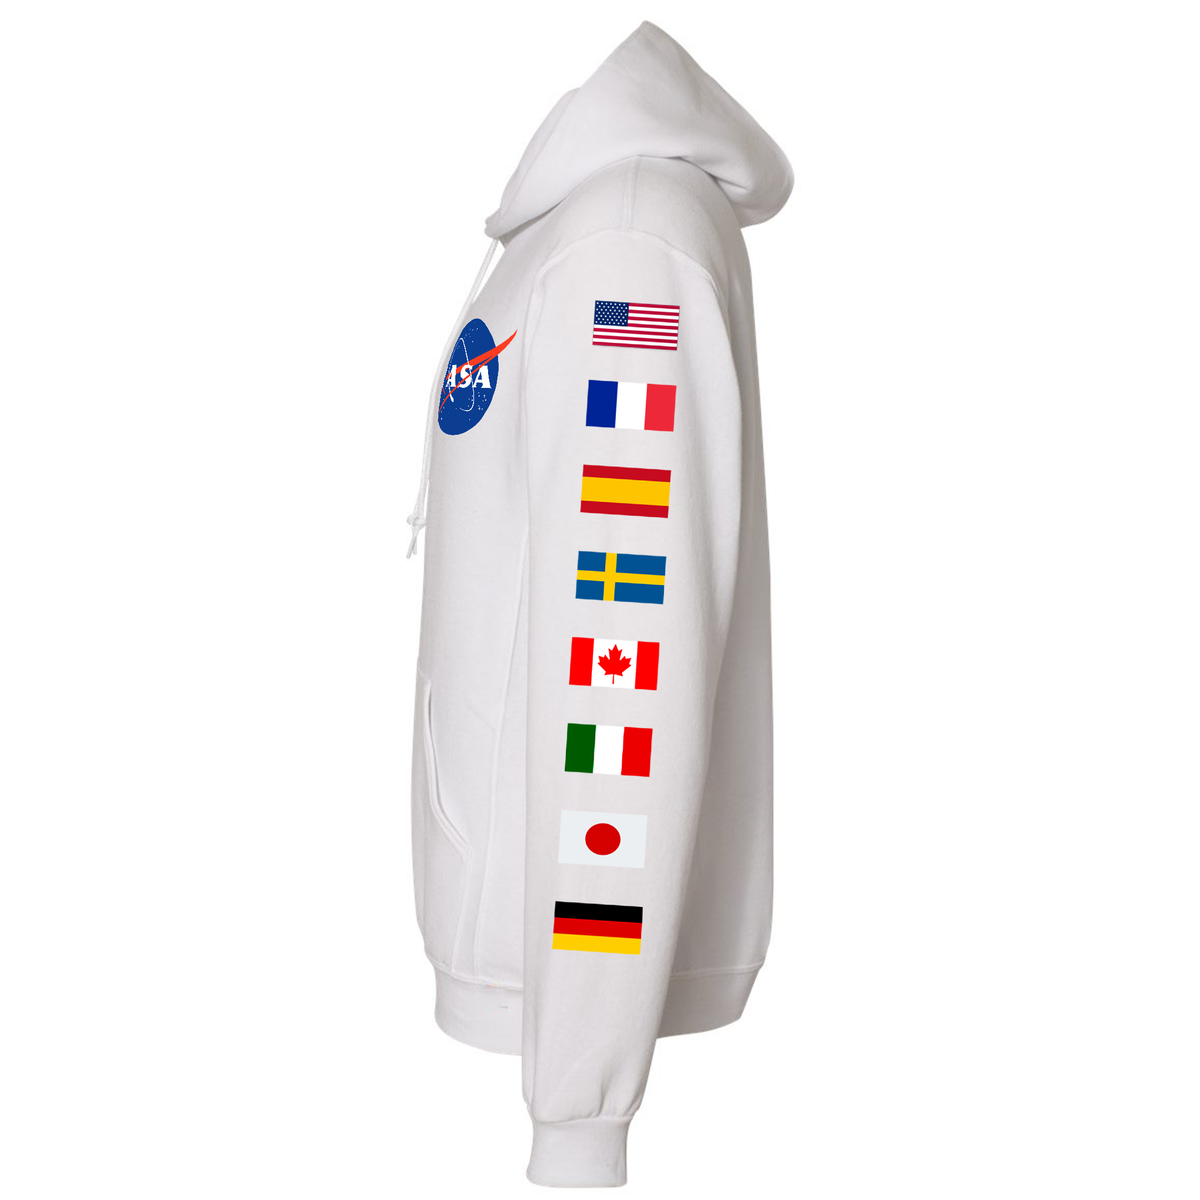 NASA 16 White Hoodie with Flags on Sleeves – Graphic Tees Store